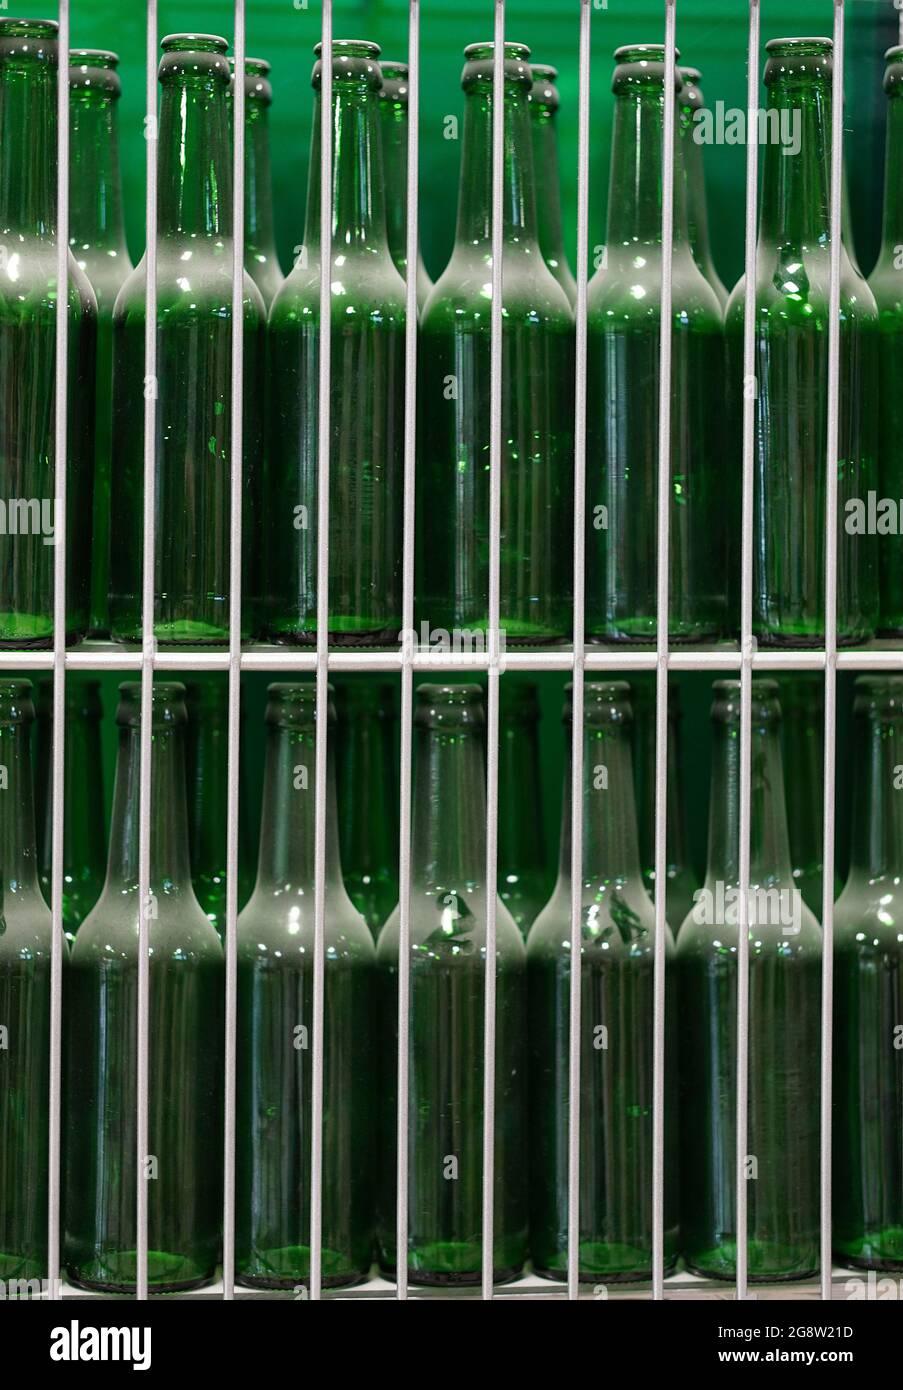 Many of transparent green dusty beer glass bottles into row, close up. Glass bottle texture.. Stock Photo